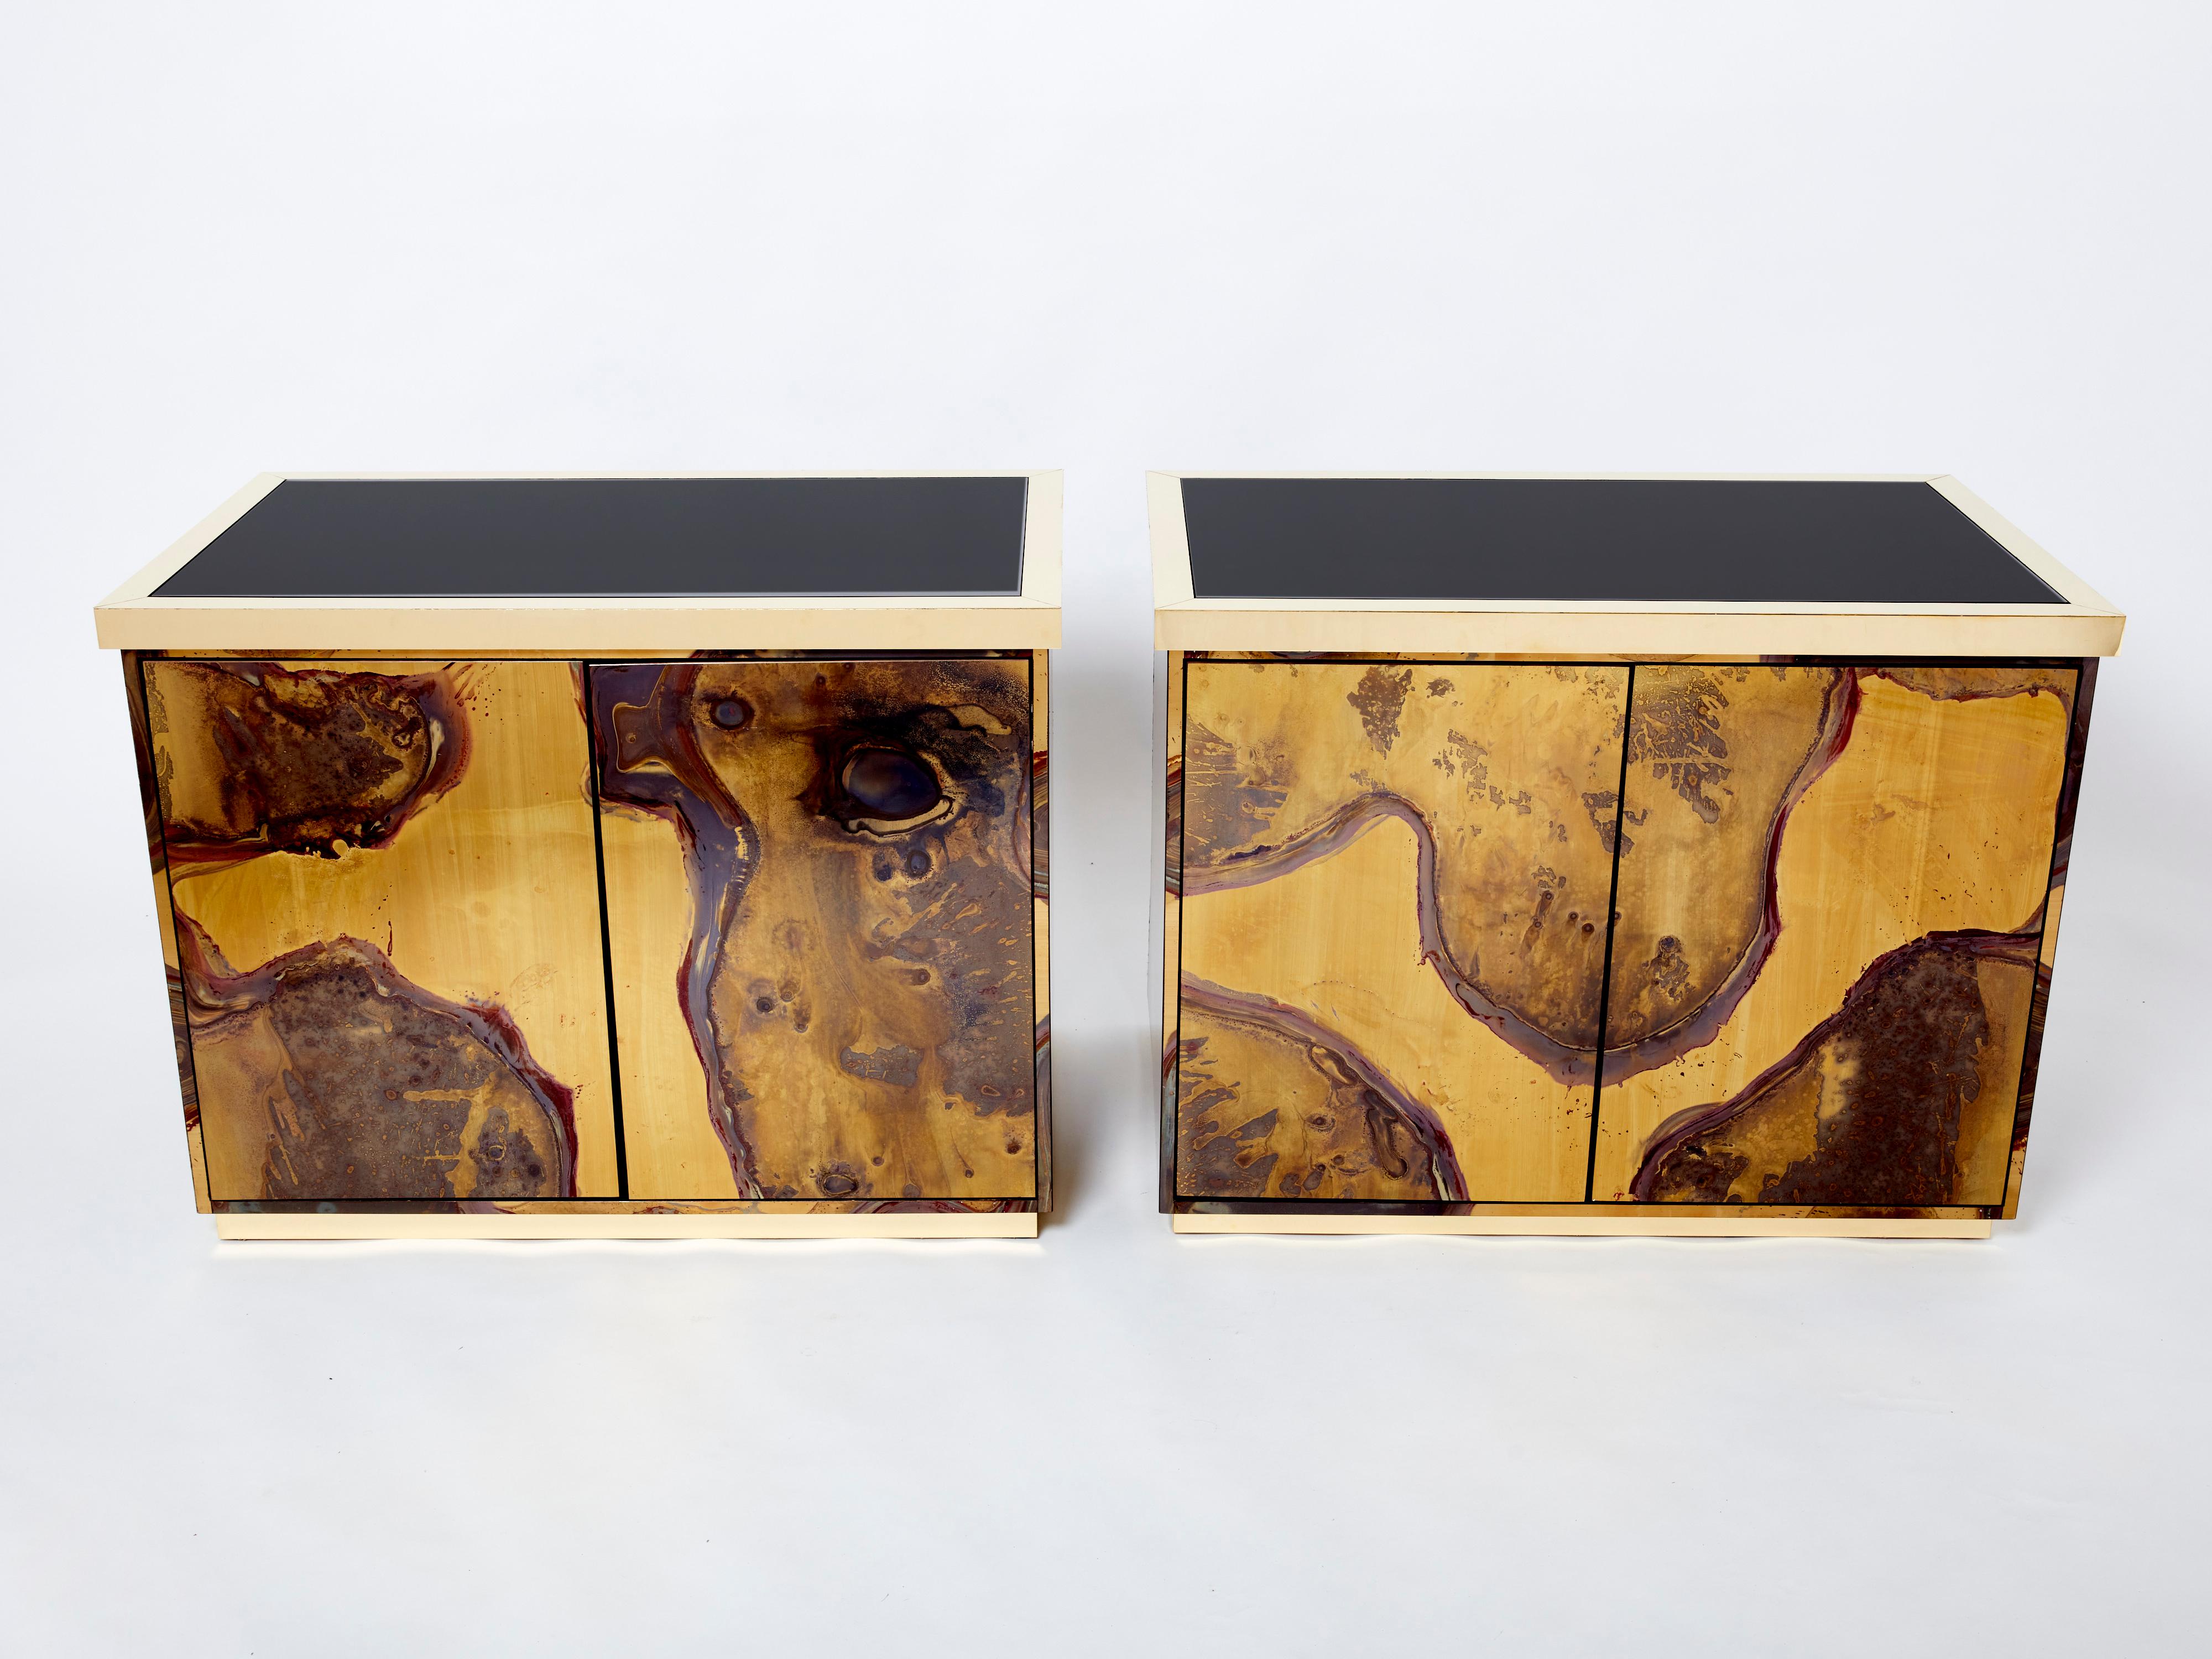 This unique pair of cabinets or buffets were created by Isabelle and Richard Faure for Parisian design firm Maison Honore in the late 1970s. Entirely covered by decorated oxidized and patinated brass all over, that was then fixed and varnished. The